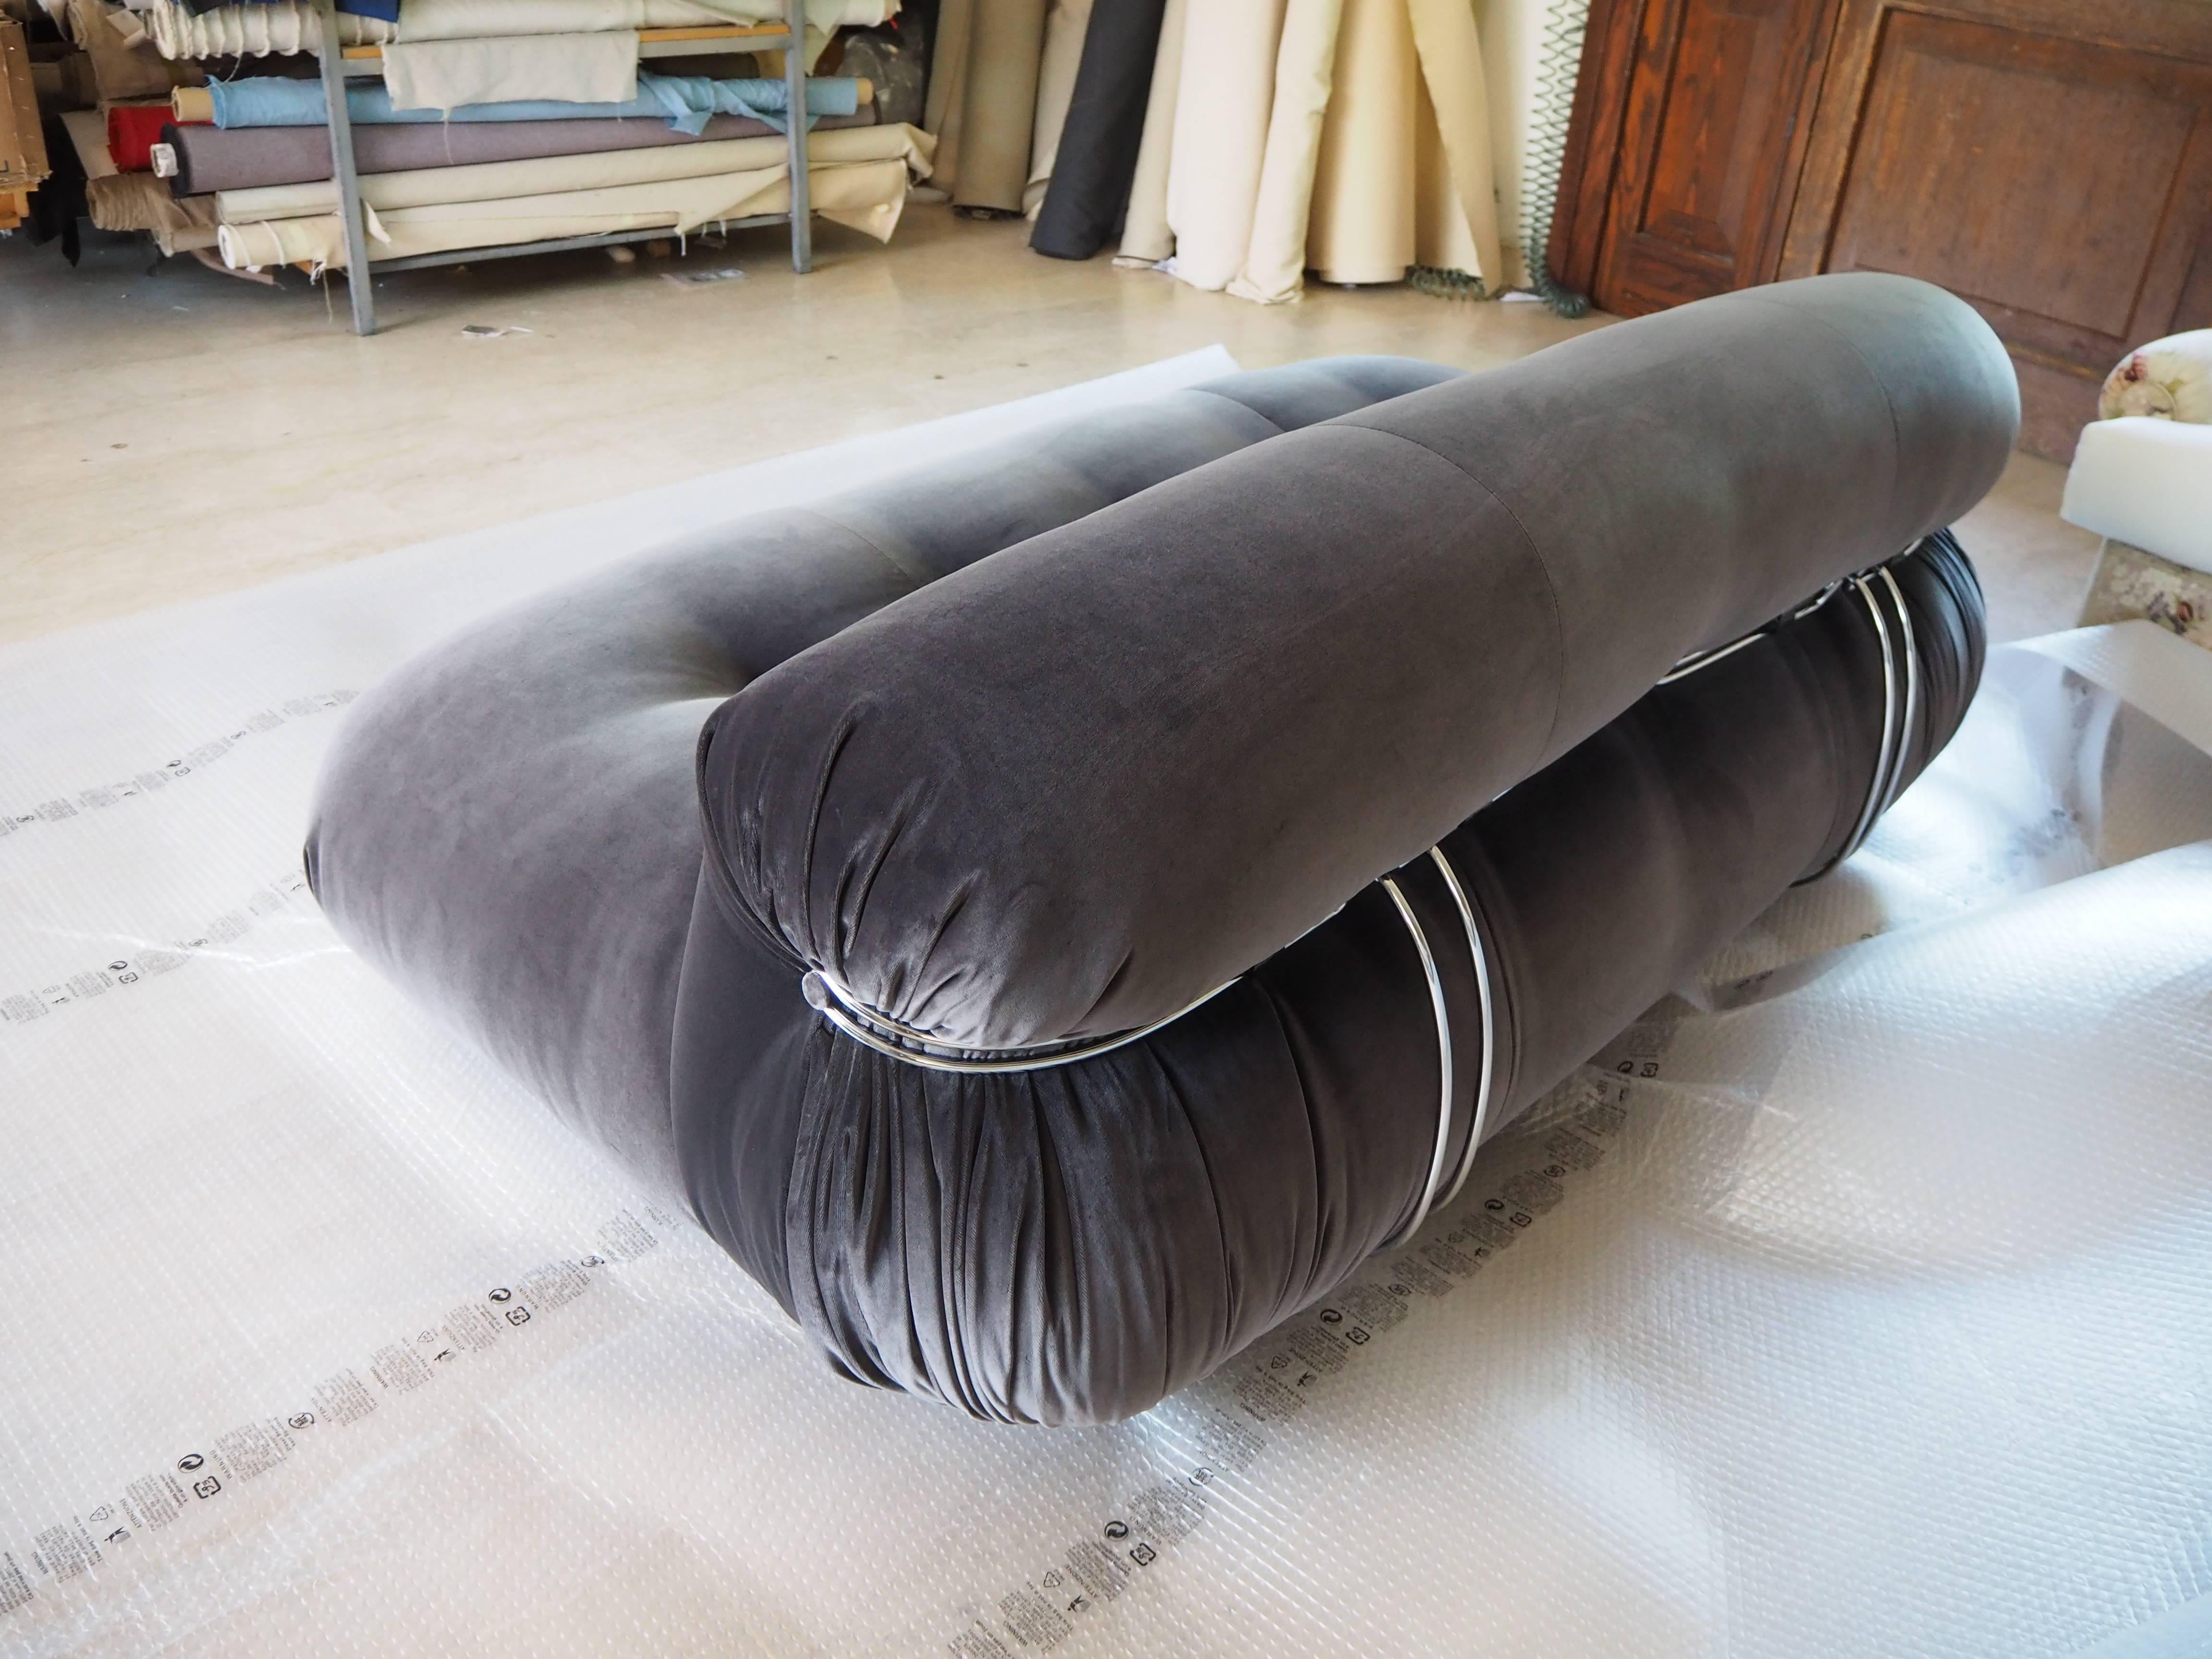 Late 20th Century Soriana Sofa by Afra & Tobia Scarpa for Cassina, 1970, New upholstery